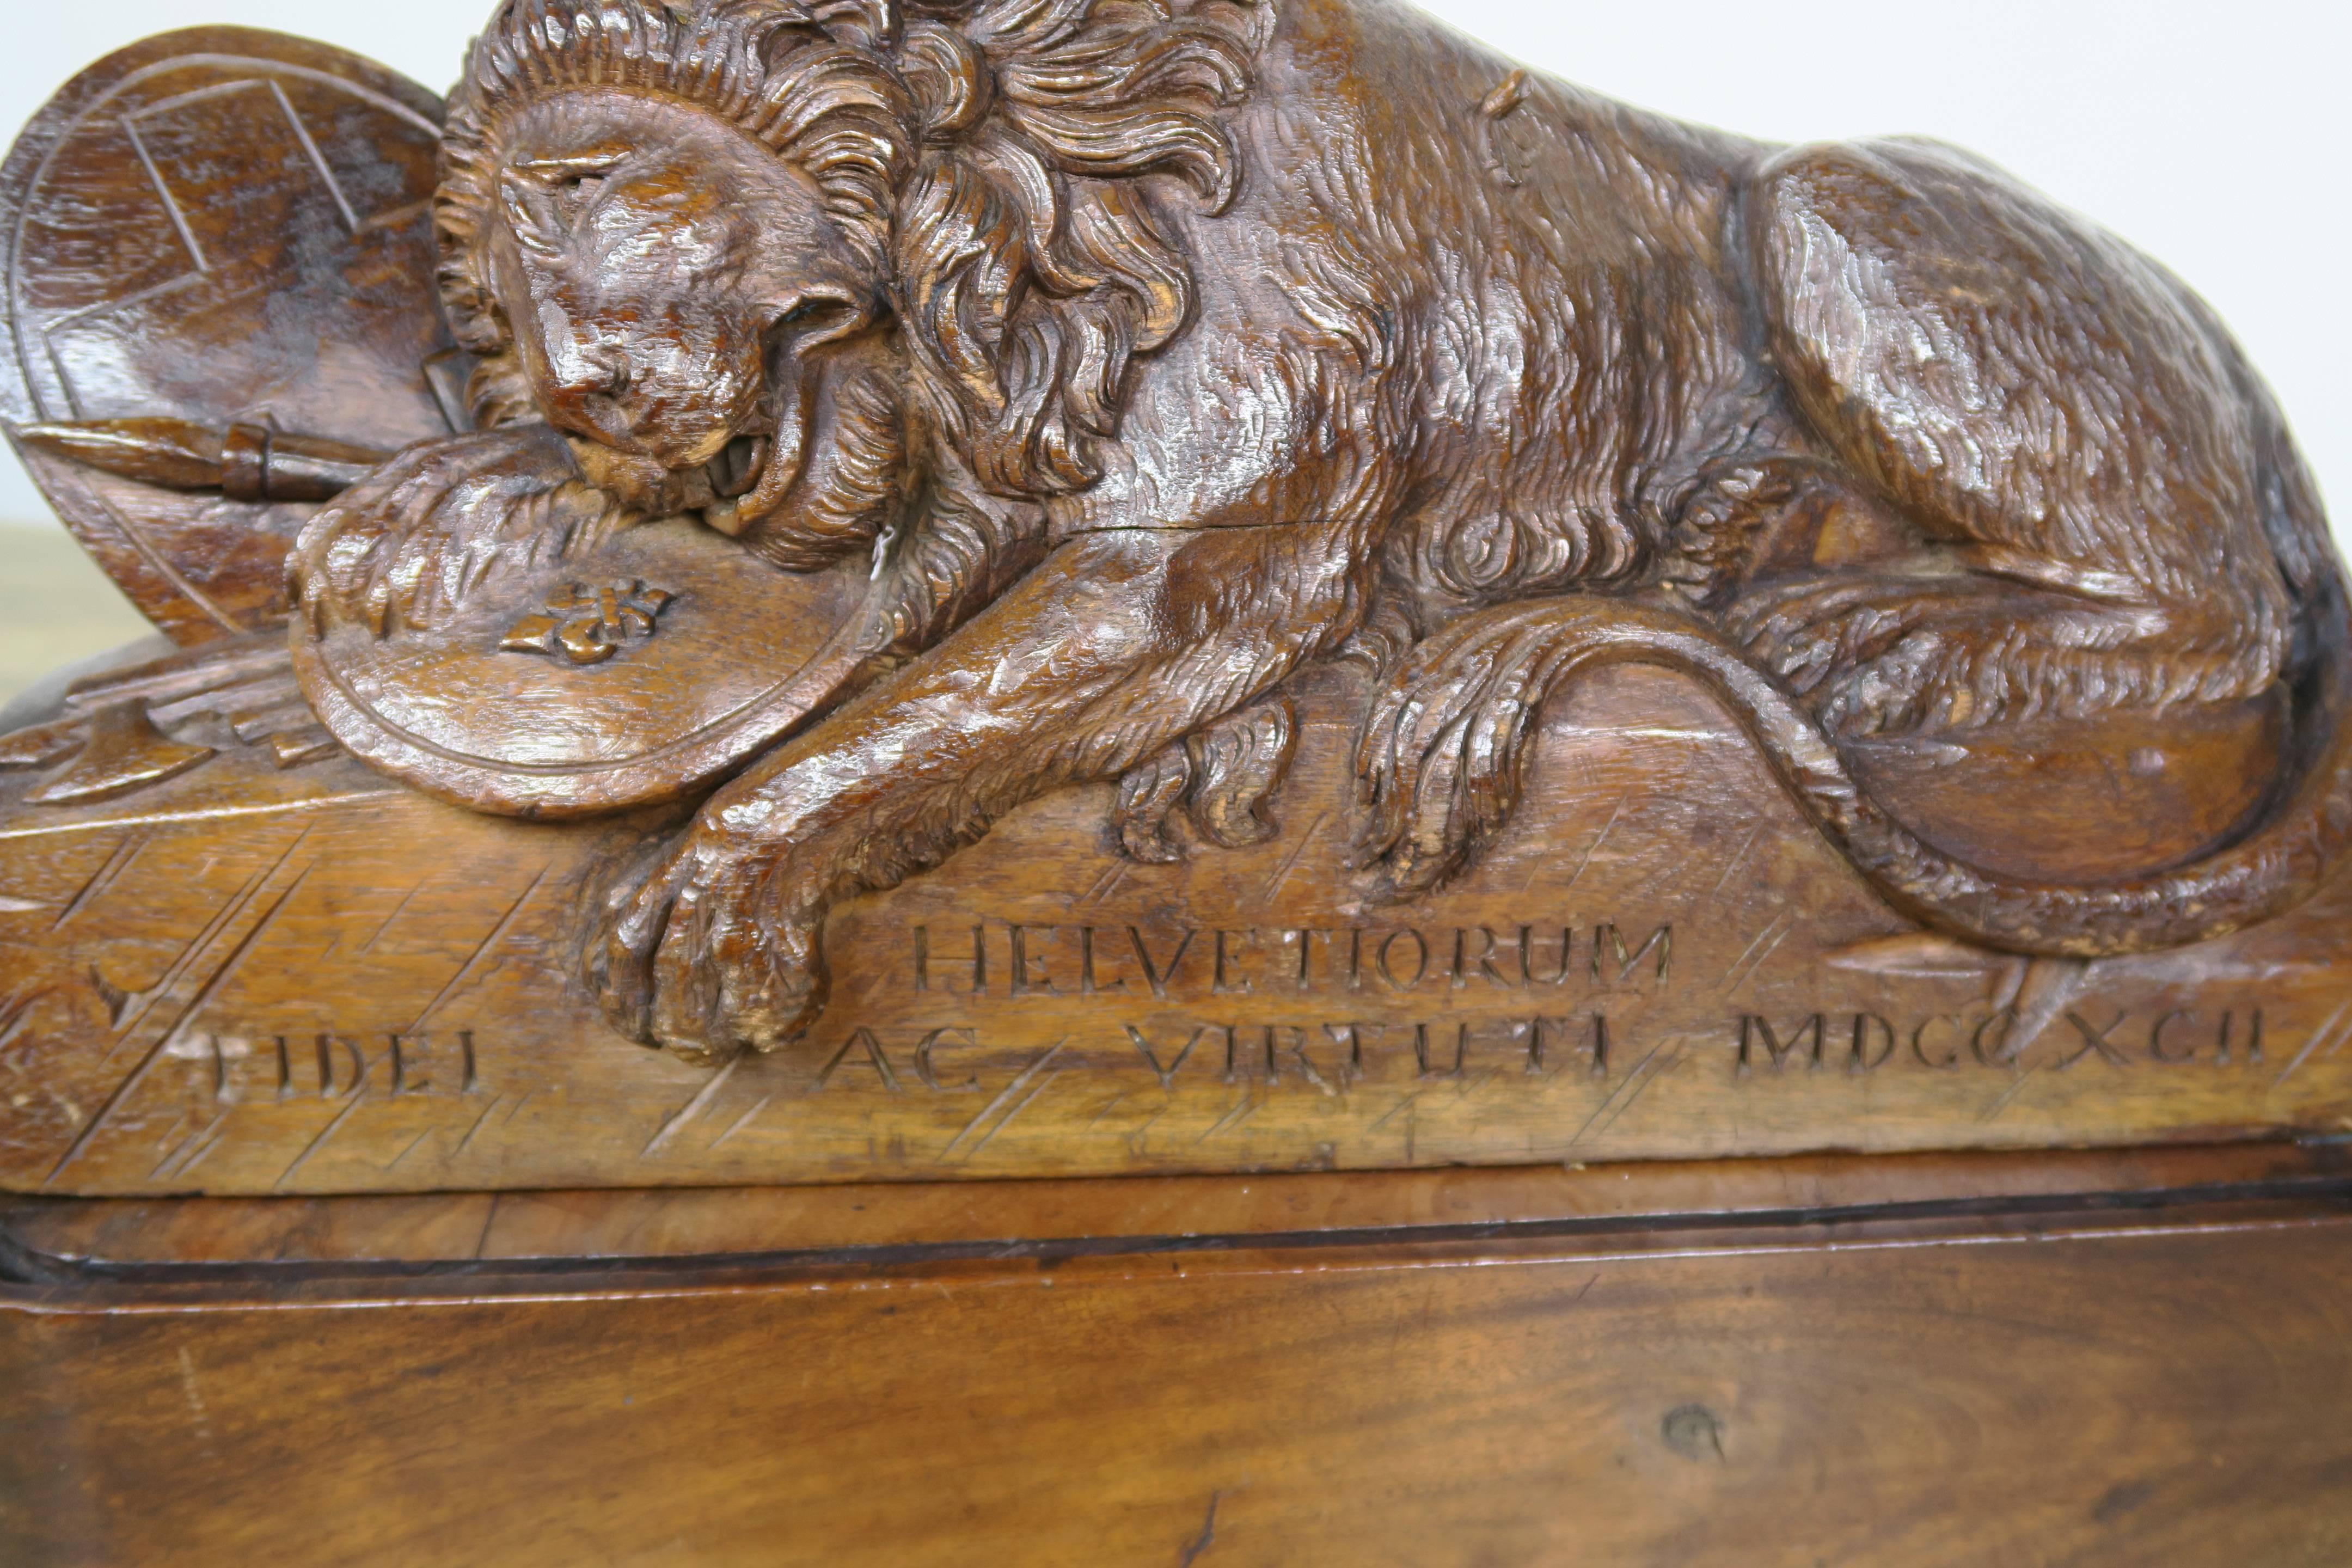 Swiss Carved Wood Lion-Copy of Original Monument in Lucerne